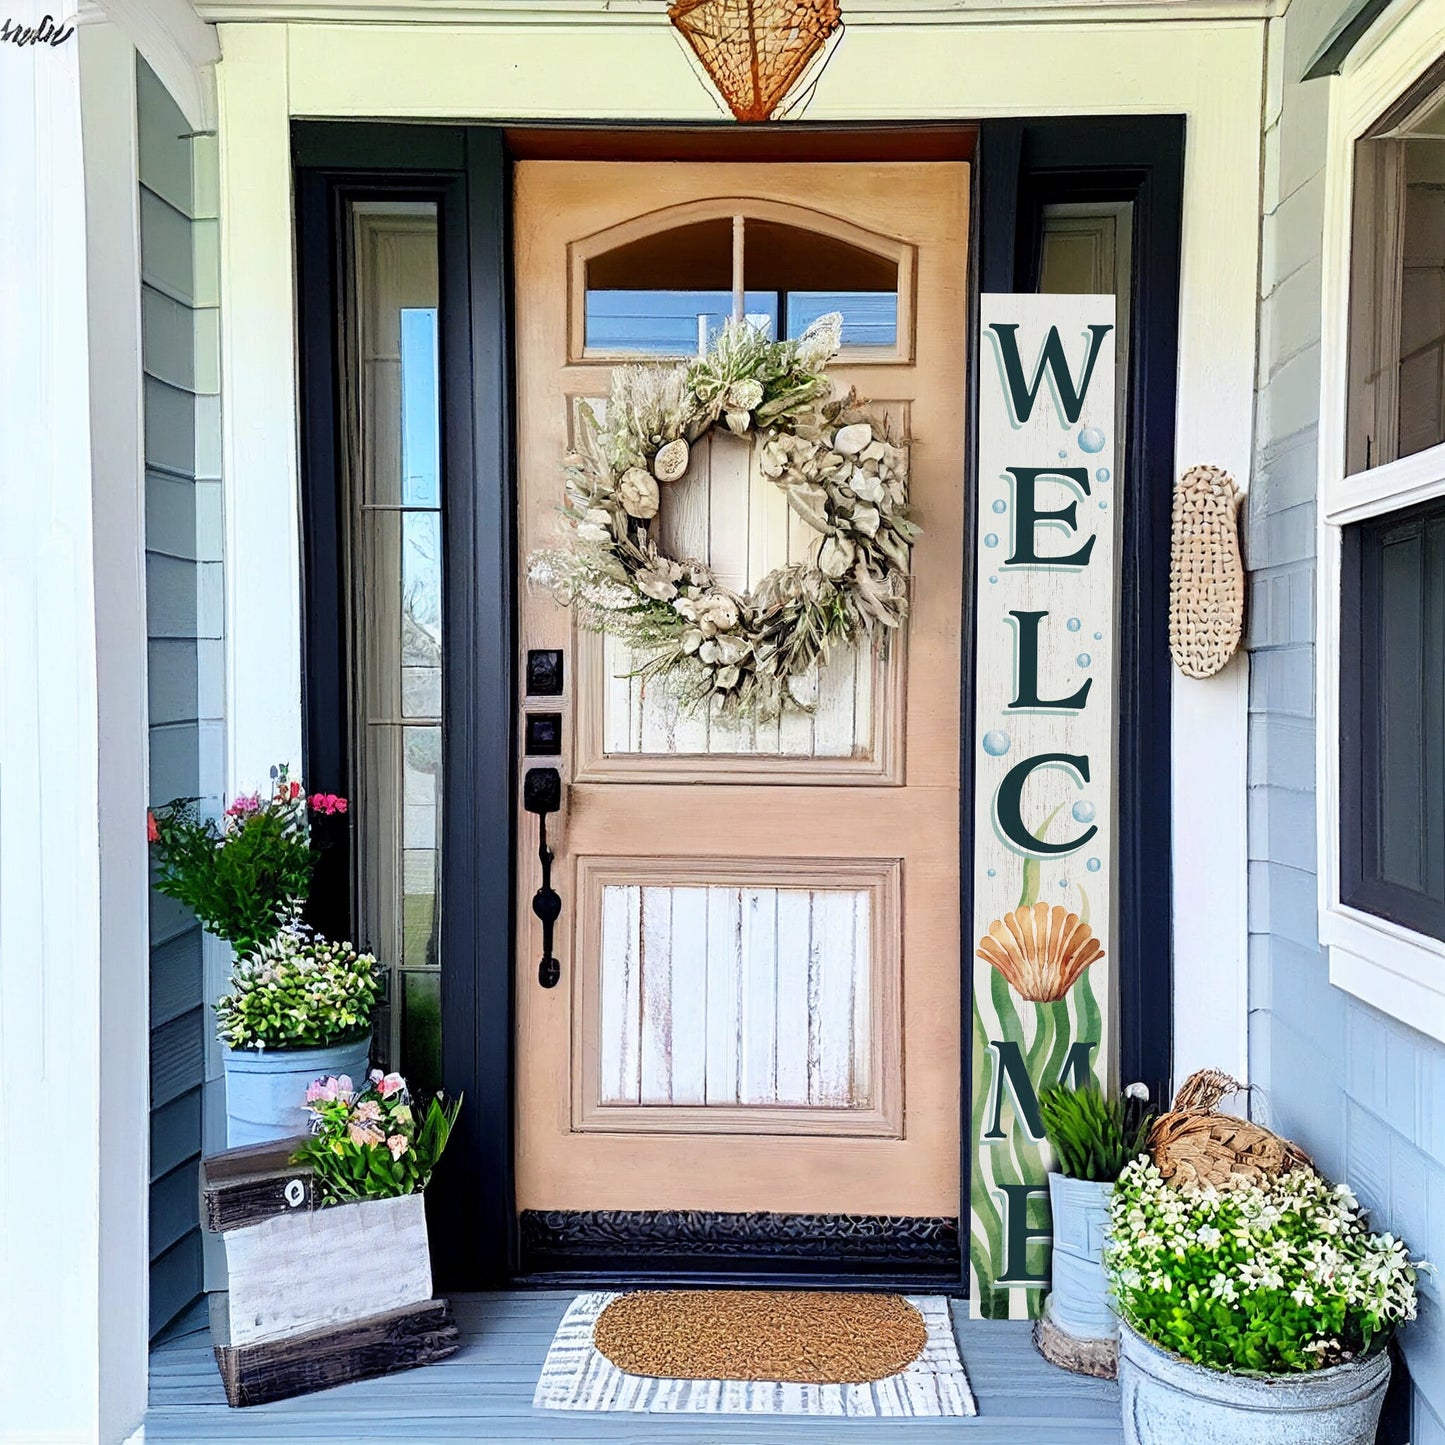 72in Outdoor Coastal "Welcome" Sign with Shell Pattern - Large Summer Front Door Porch Decor for Farmhouse Home Decorations